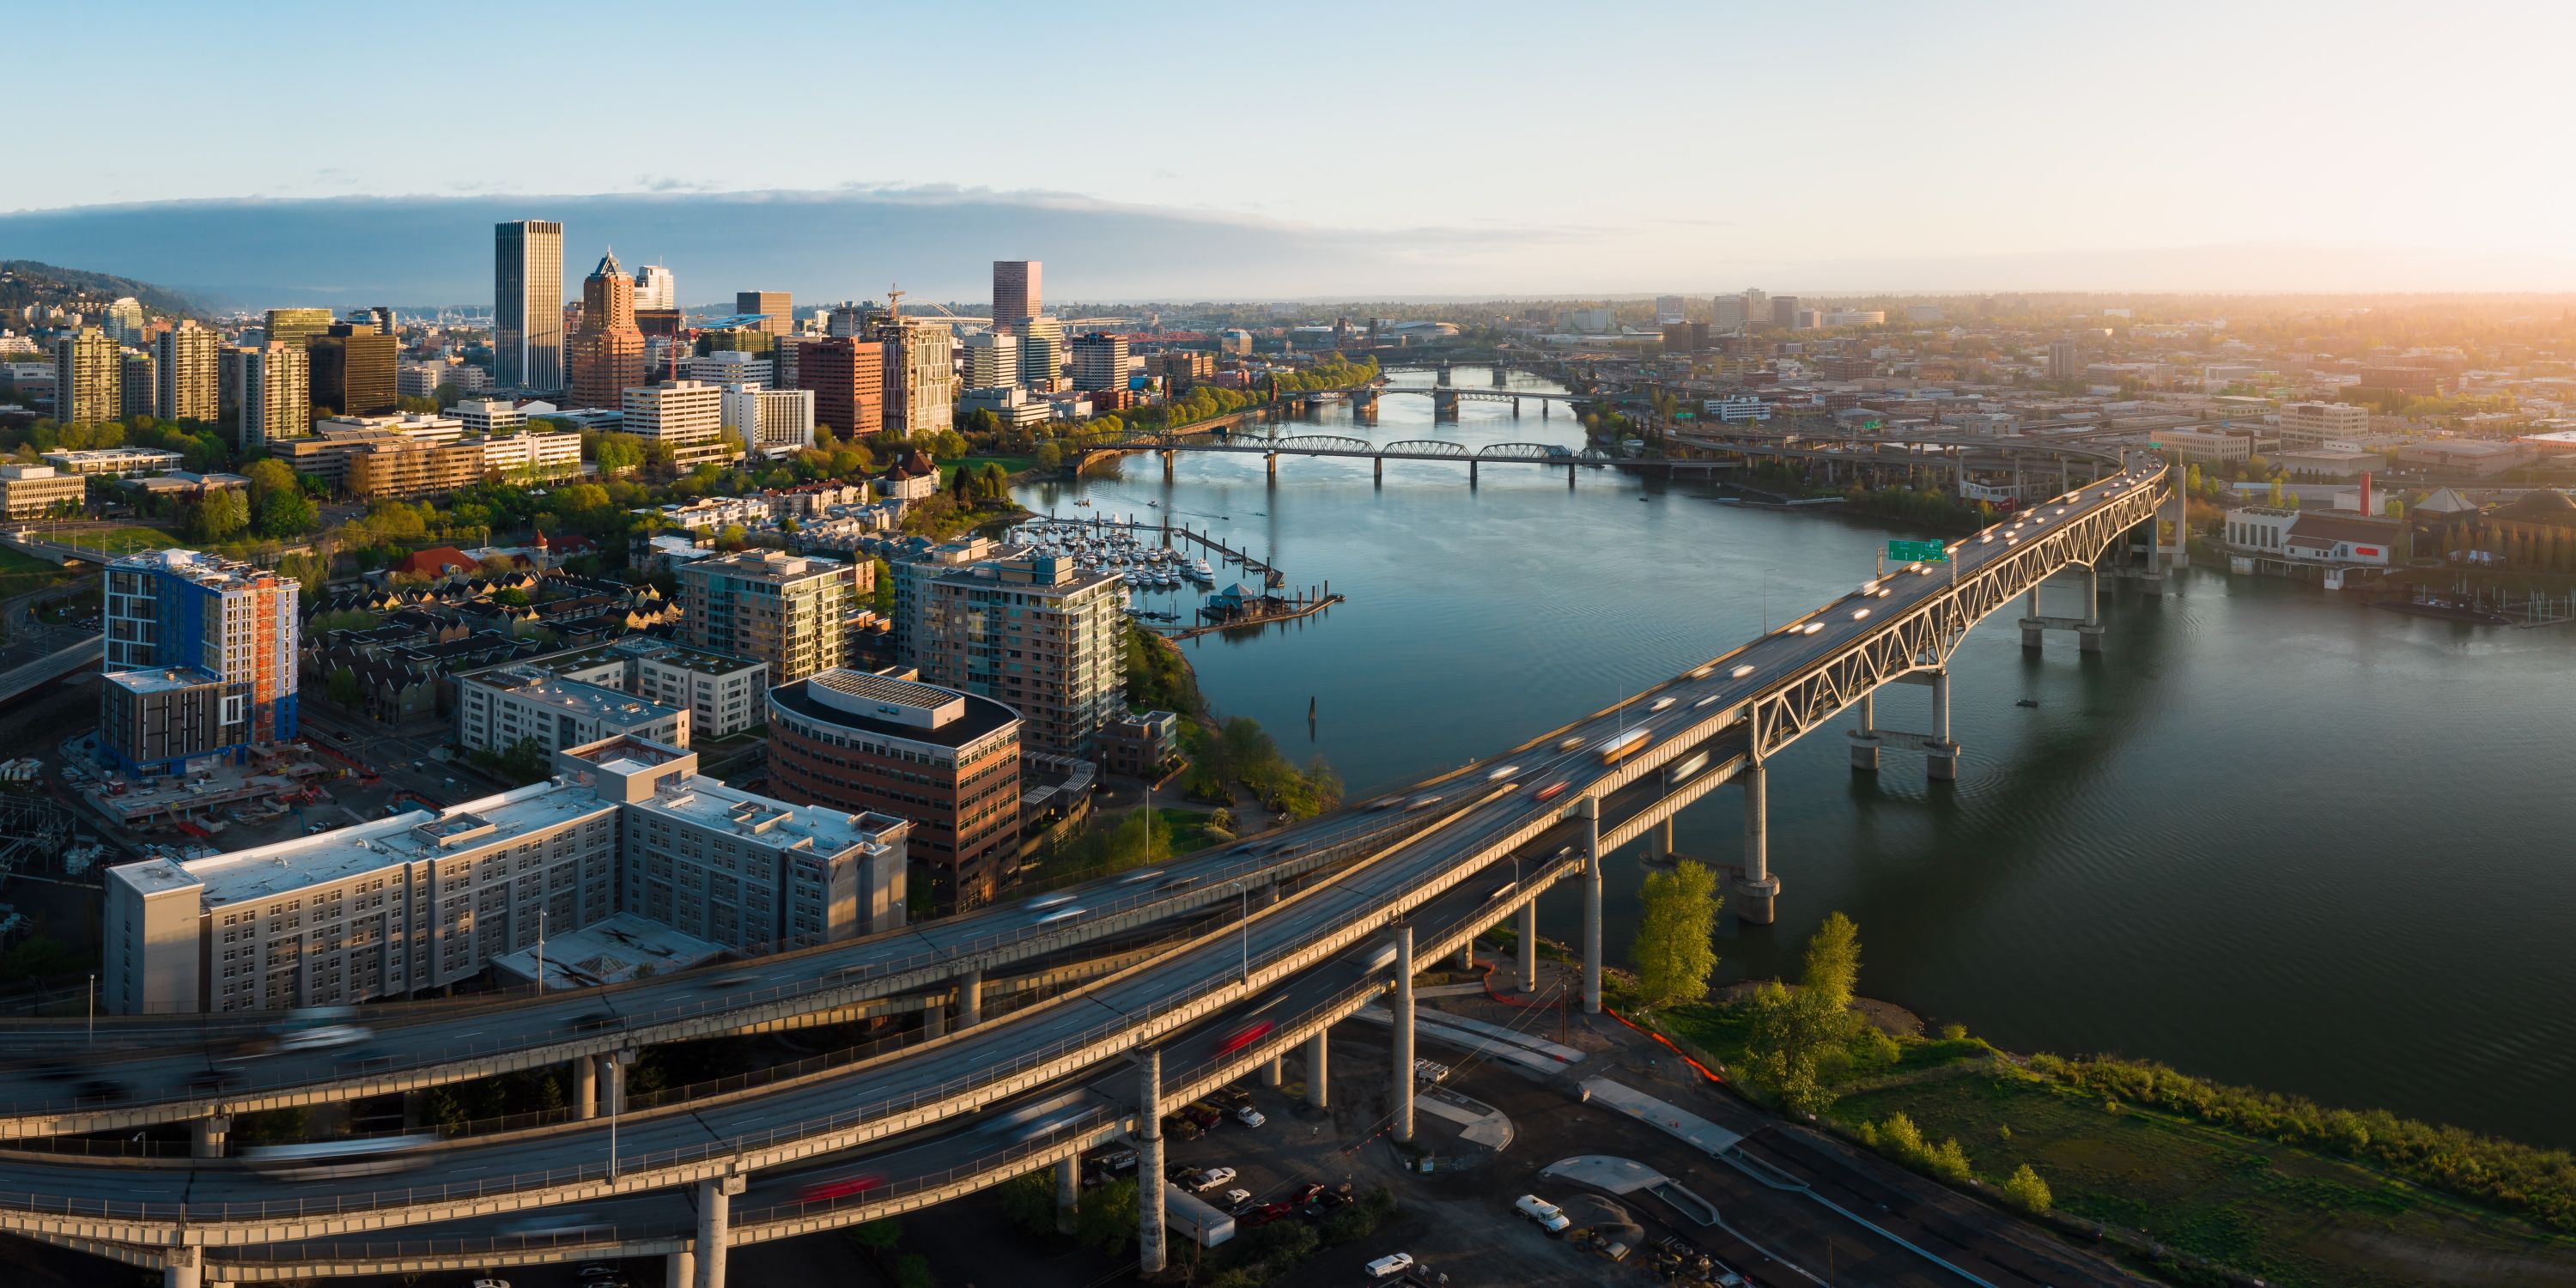 17 Reasons To Move Your Business To Portland Oregon